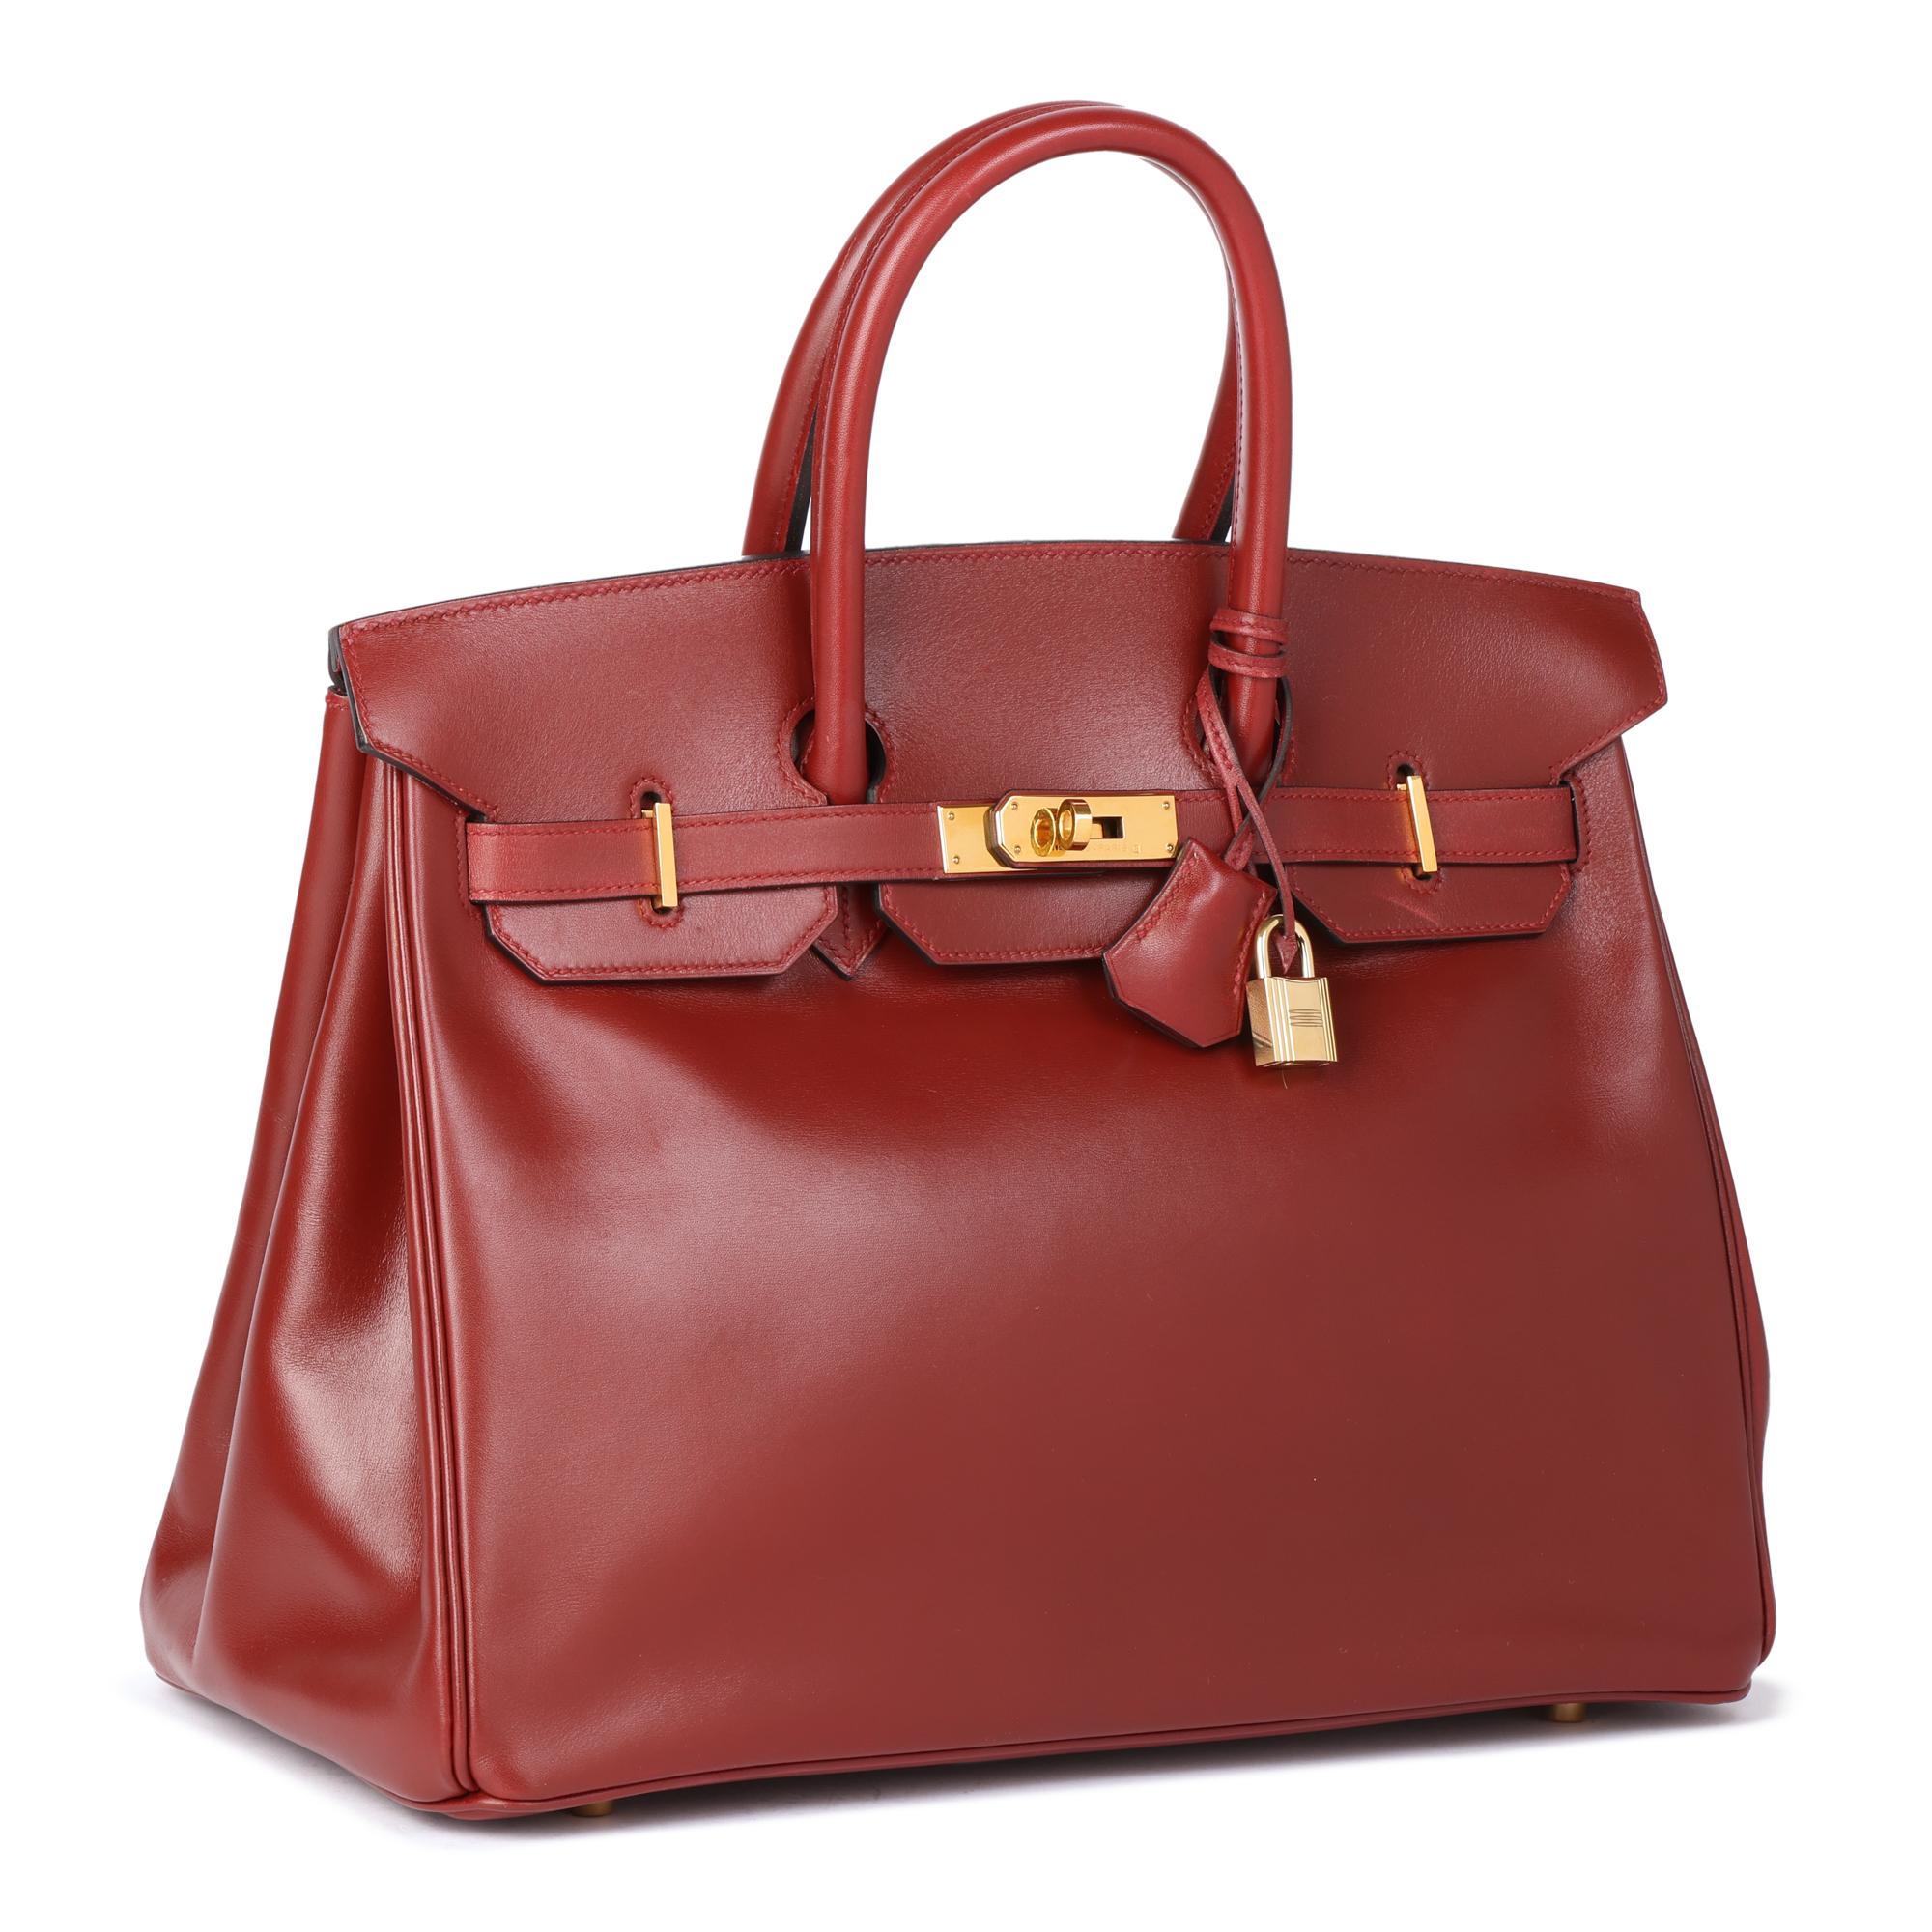 HERMÈS
Rouge Vif Box Calf Leather Vintage Birkin 35cm Retourne

Serial Number: [C]
Age (Circa): 1999
Accompanied By: Padlock, Keys, Clochette
Authenticity Details: Date Stamp (Made in France)
Gender: Ladies
Type: Tote

Colour: Rouge Vif
Hardware: